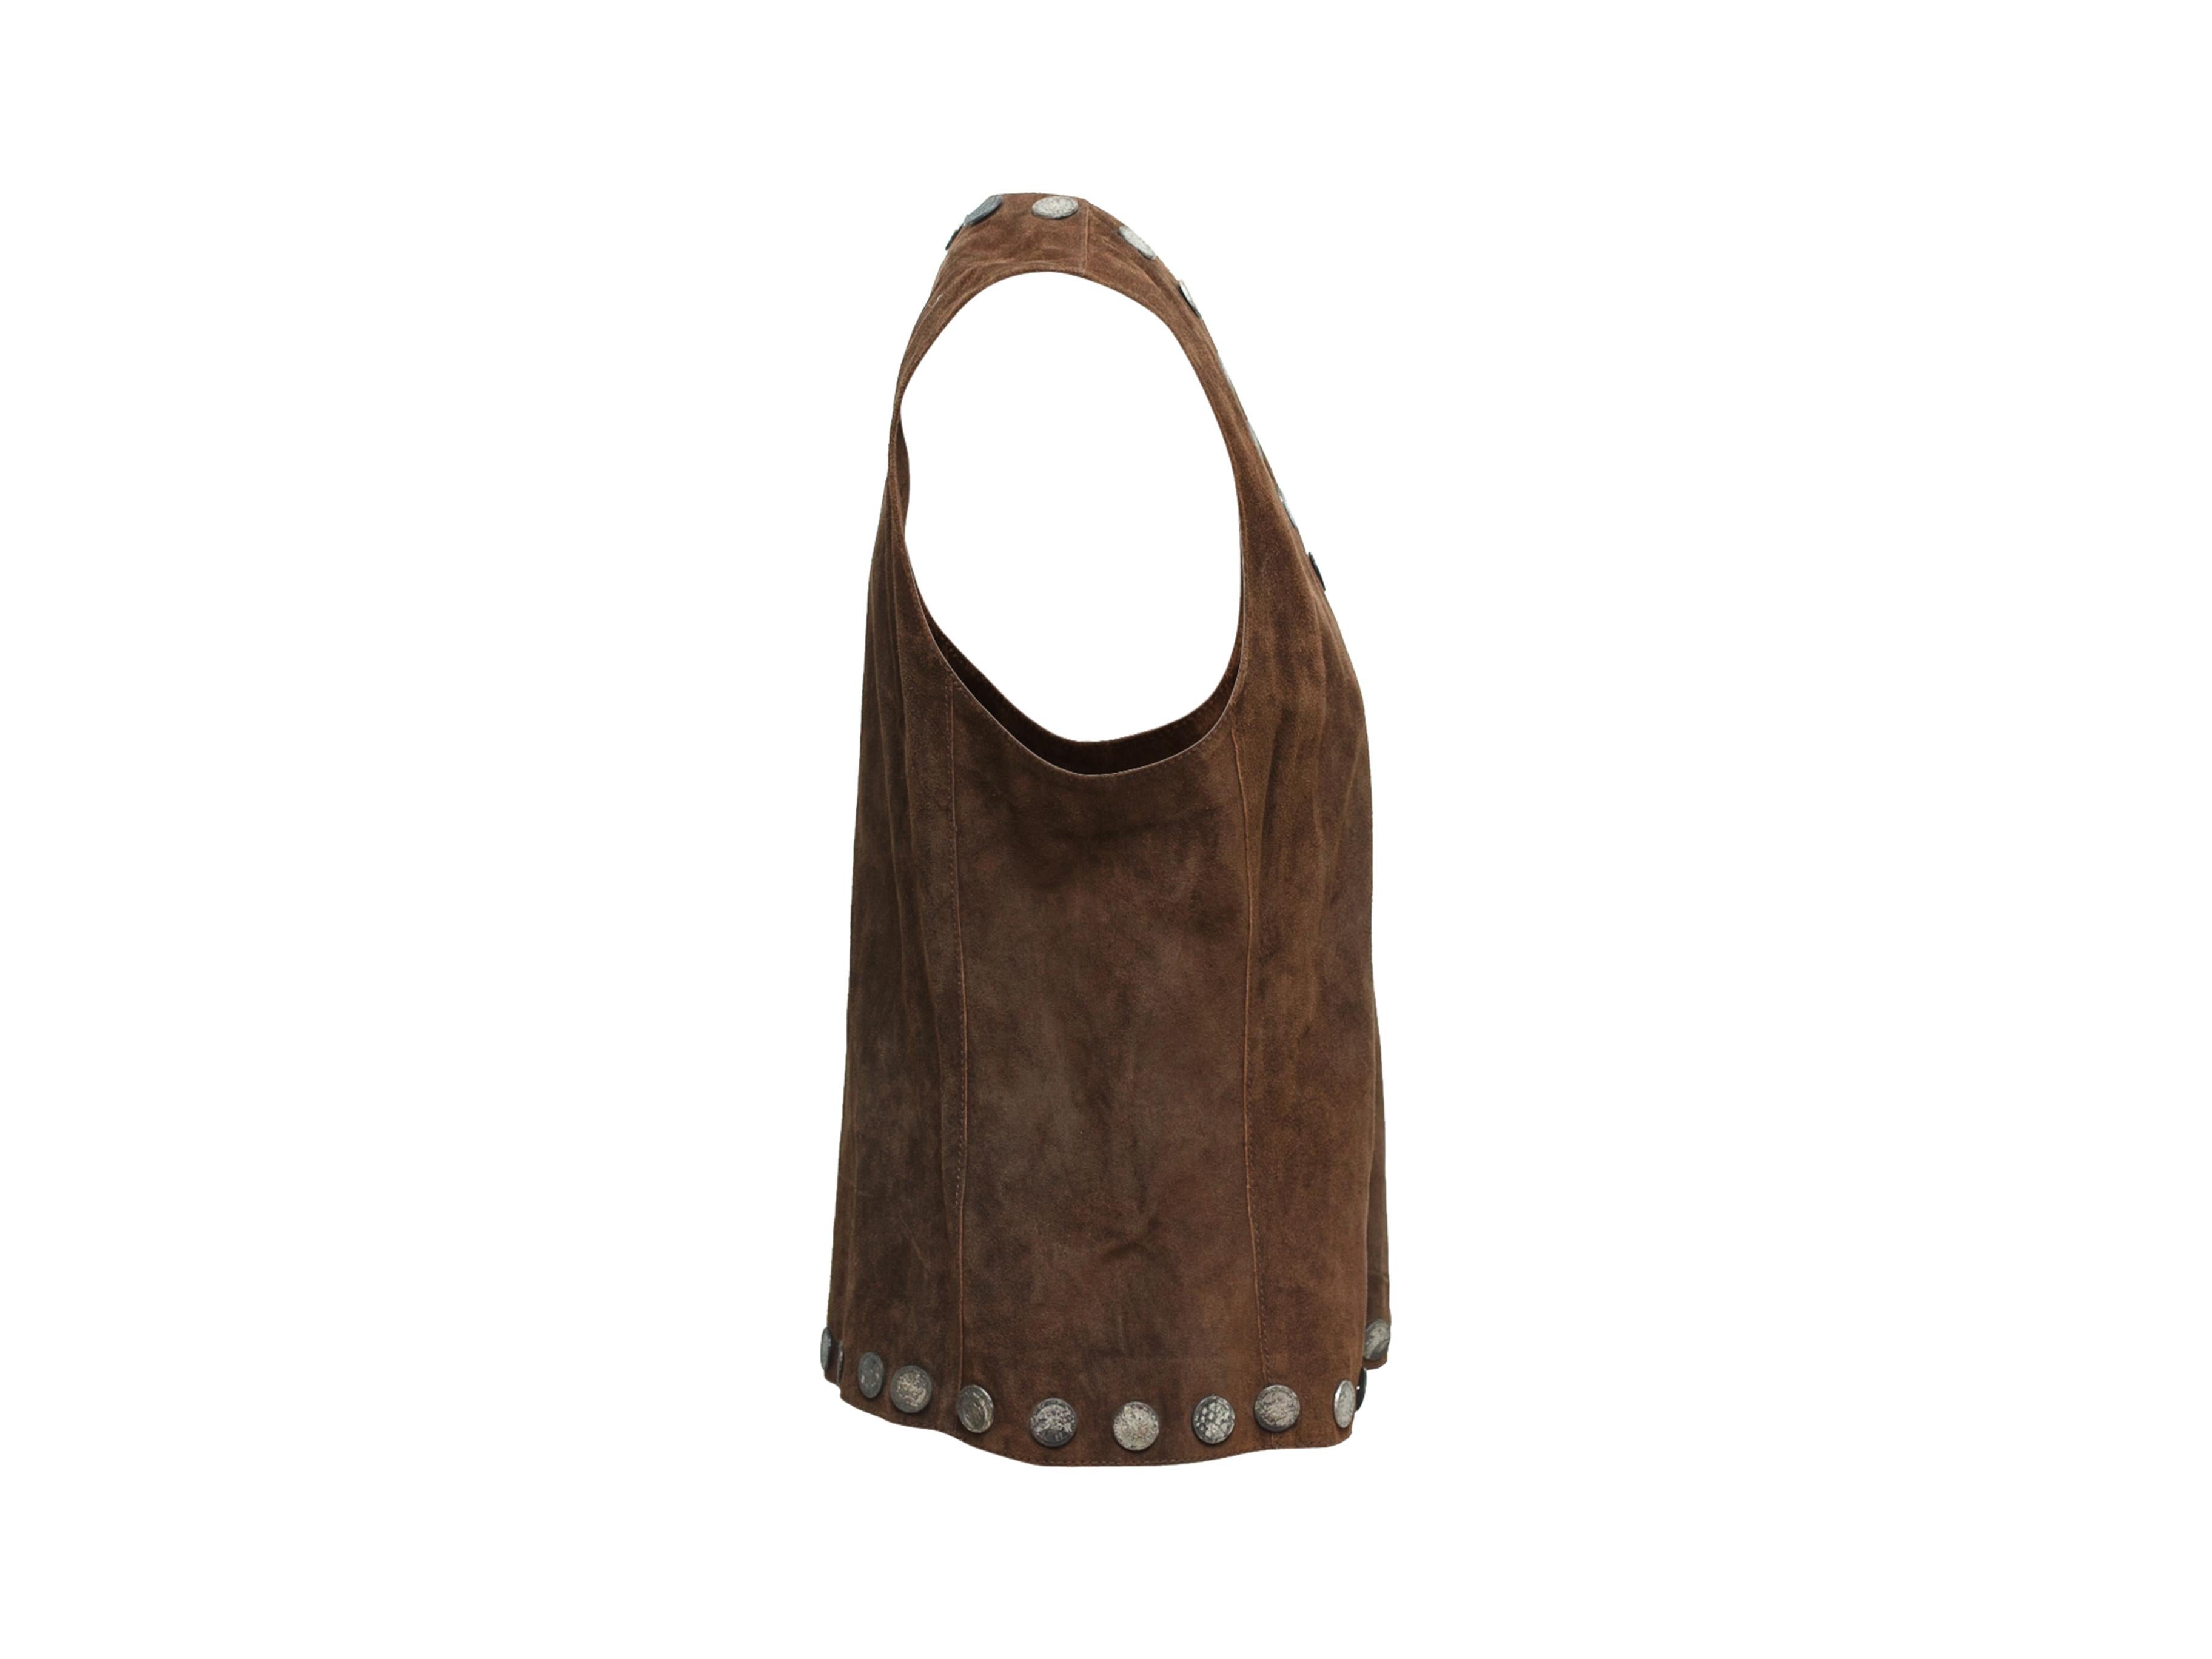 Product details: Brown suede leather vest by Miu Miu. V-neckline. Tonal stitching. Silver-tone coin embellishment trim throughout. Designer size IT44. 40